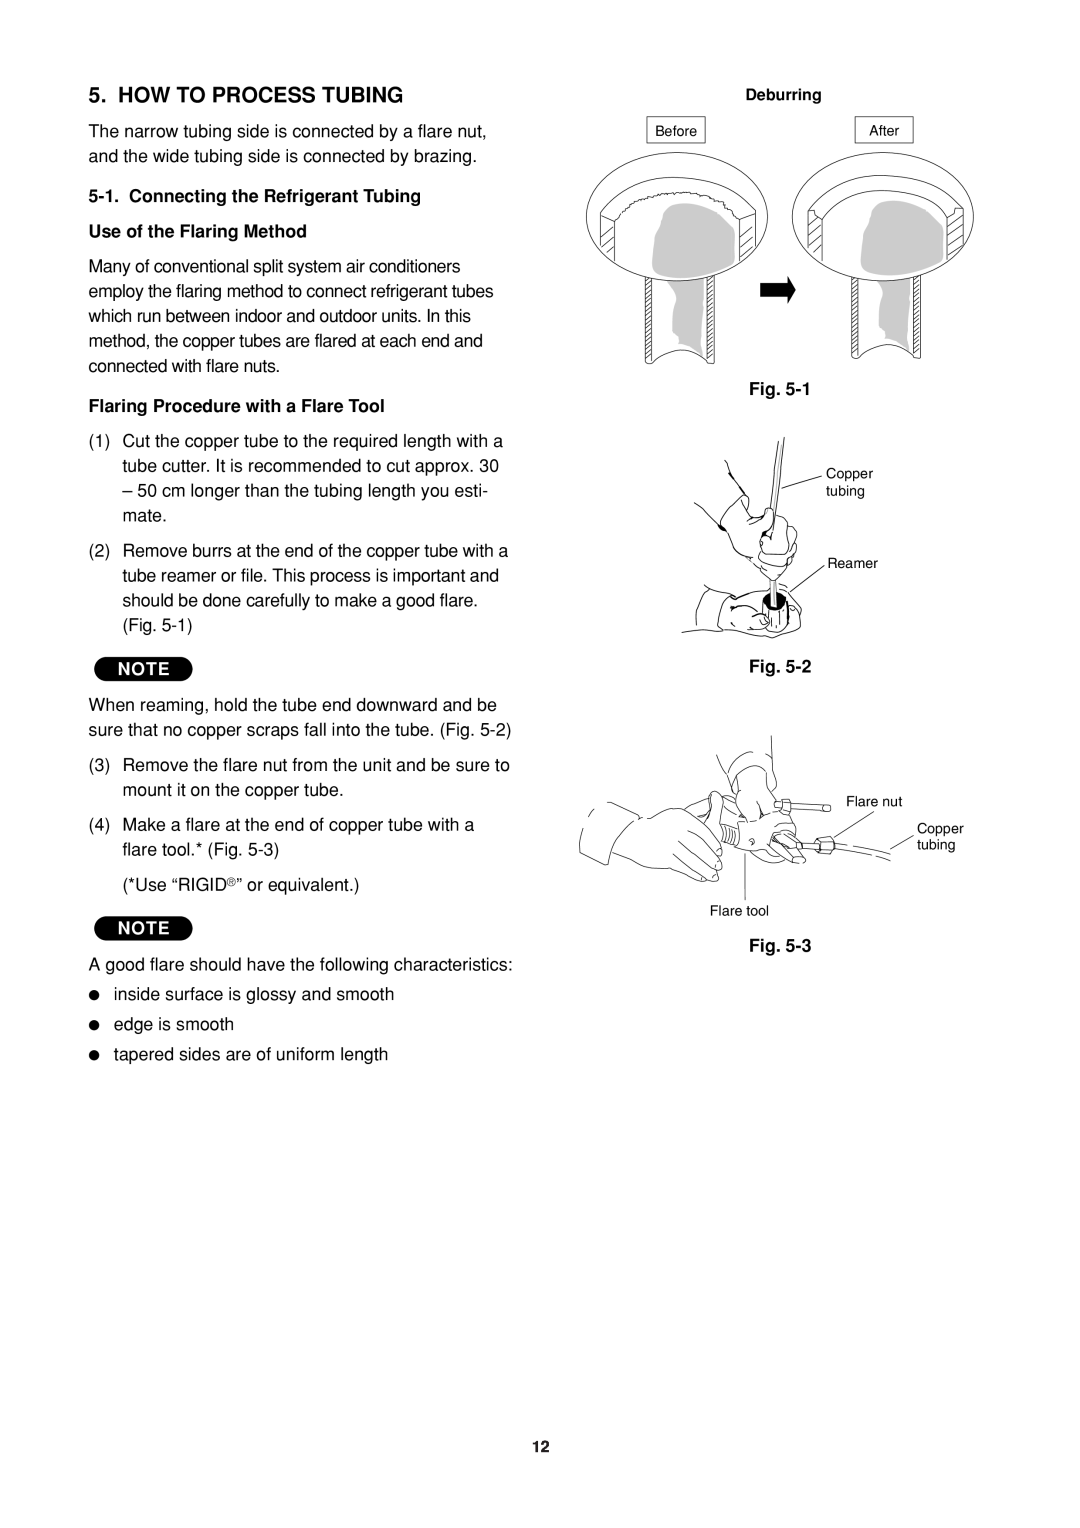 Sanyo SPW-FTR124EH56 operation manual How To Process Tubing, Connecting the Refrigerant Tubing, Use of the Flaring Method 